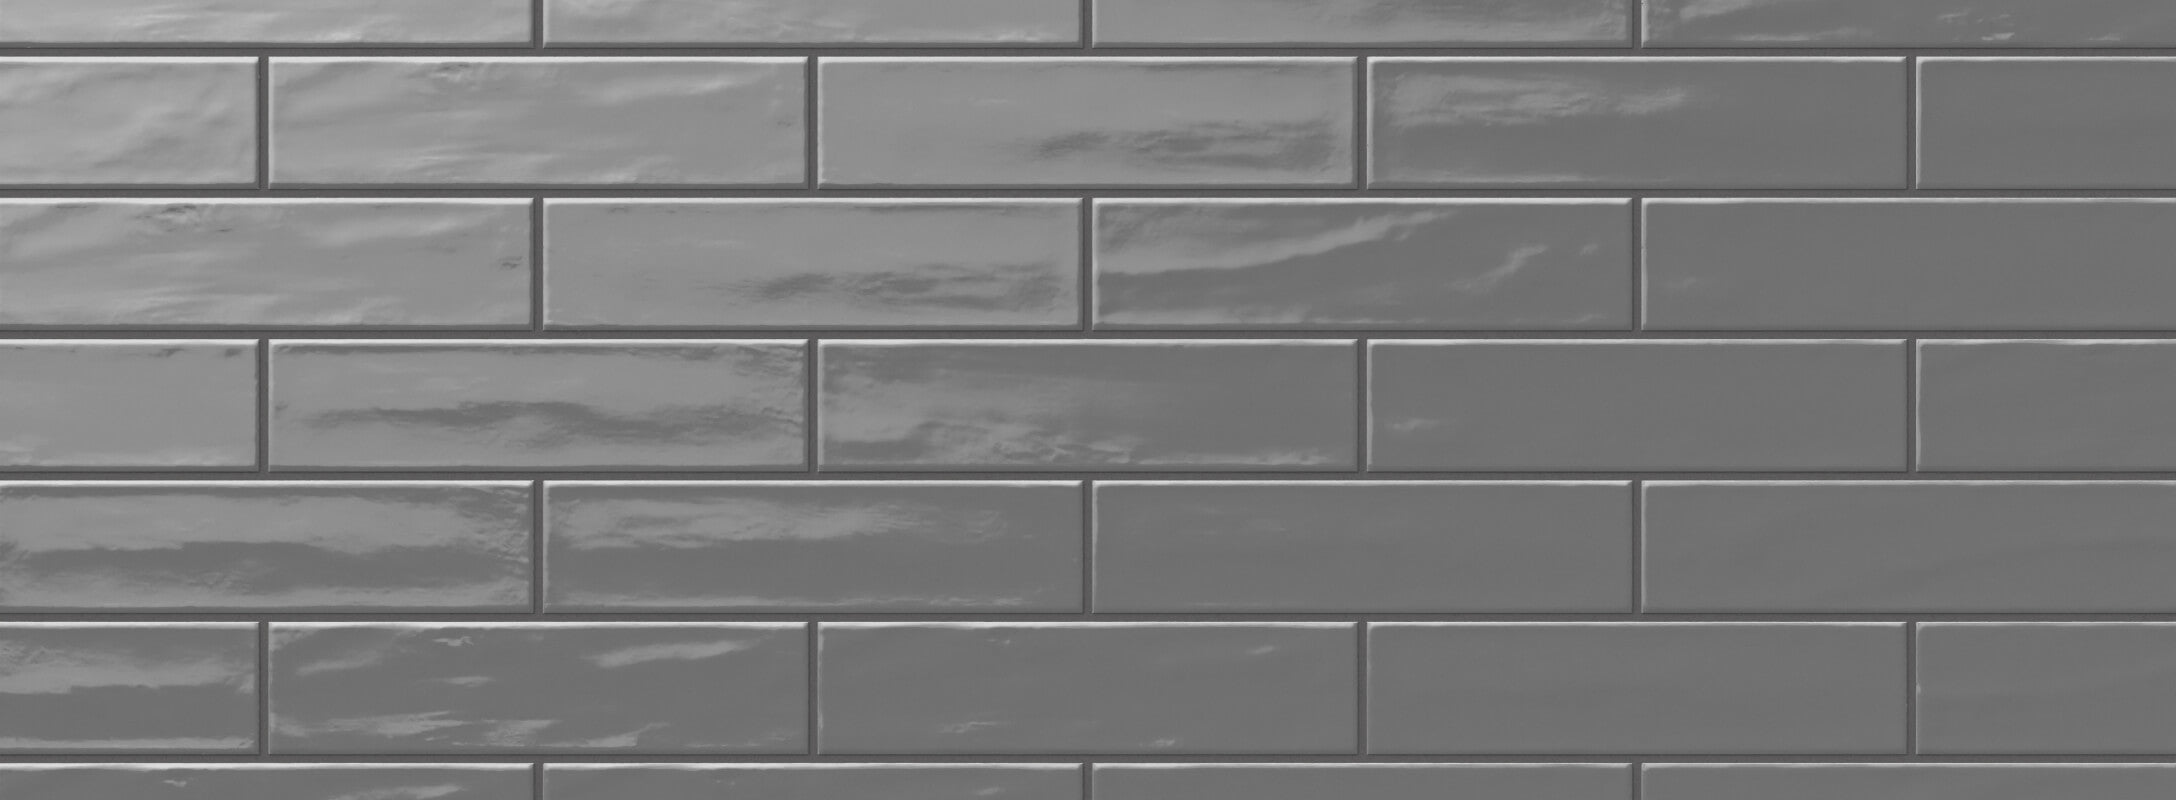 Glossy dark grey ceramic tiles in a classic subway layout, adding a sleek and modern touch to bathroom walls